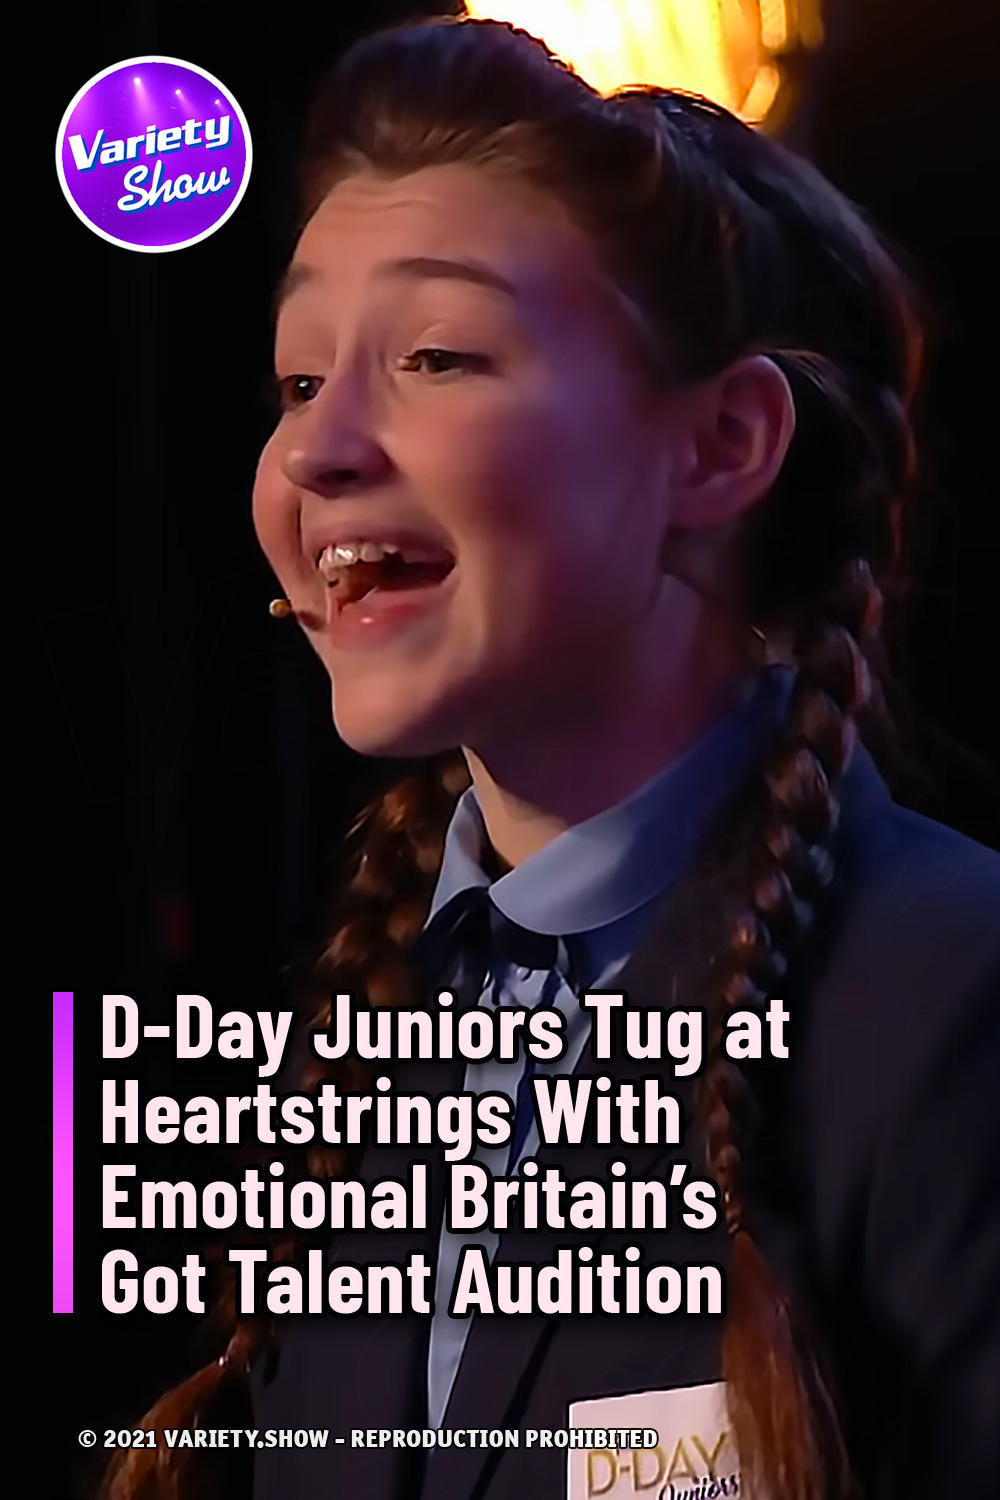 D-Day Juniors Tug at Heartstrings With Emotional Britain’s Got Talent Audition